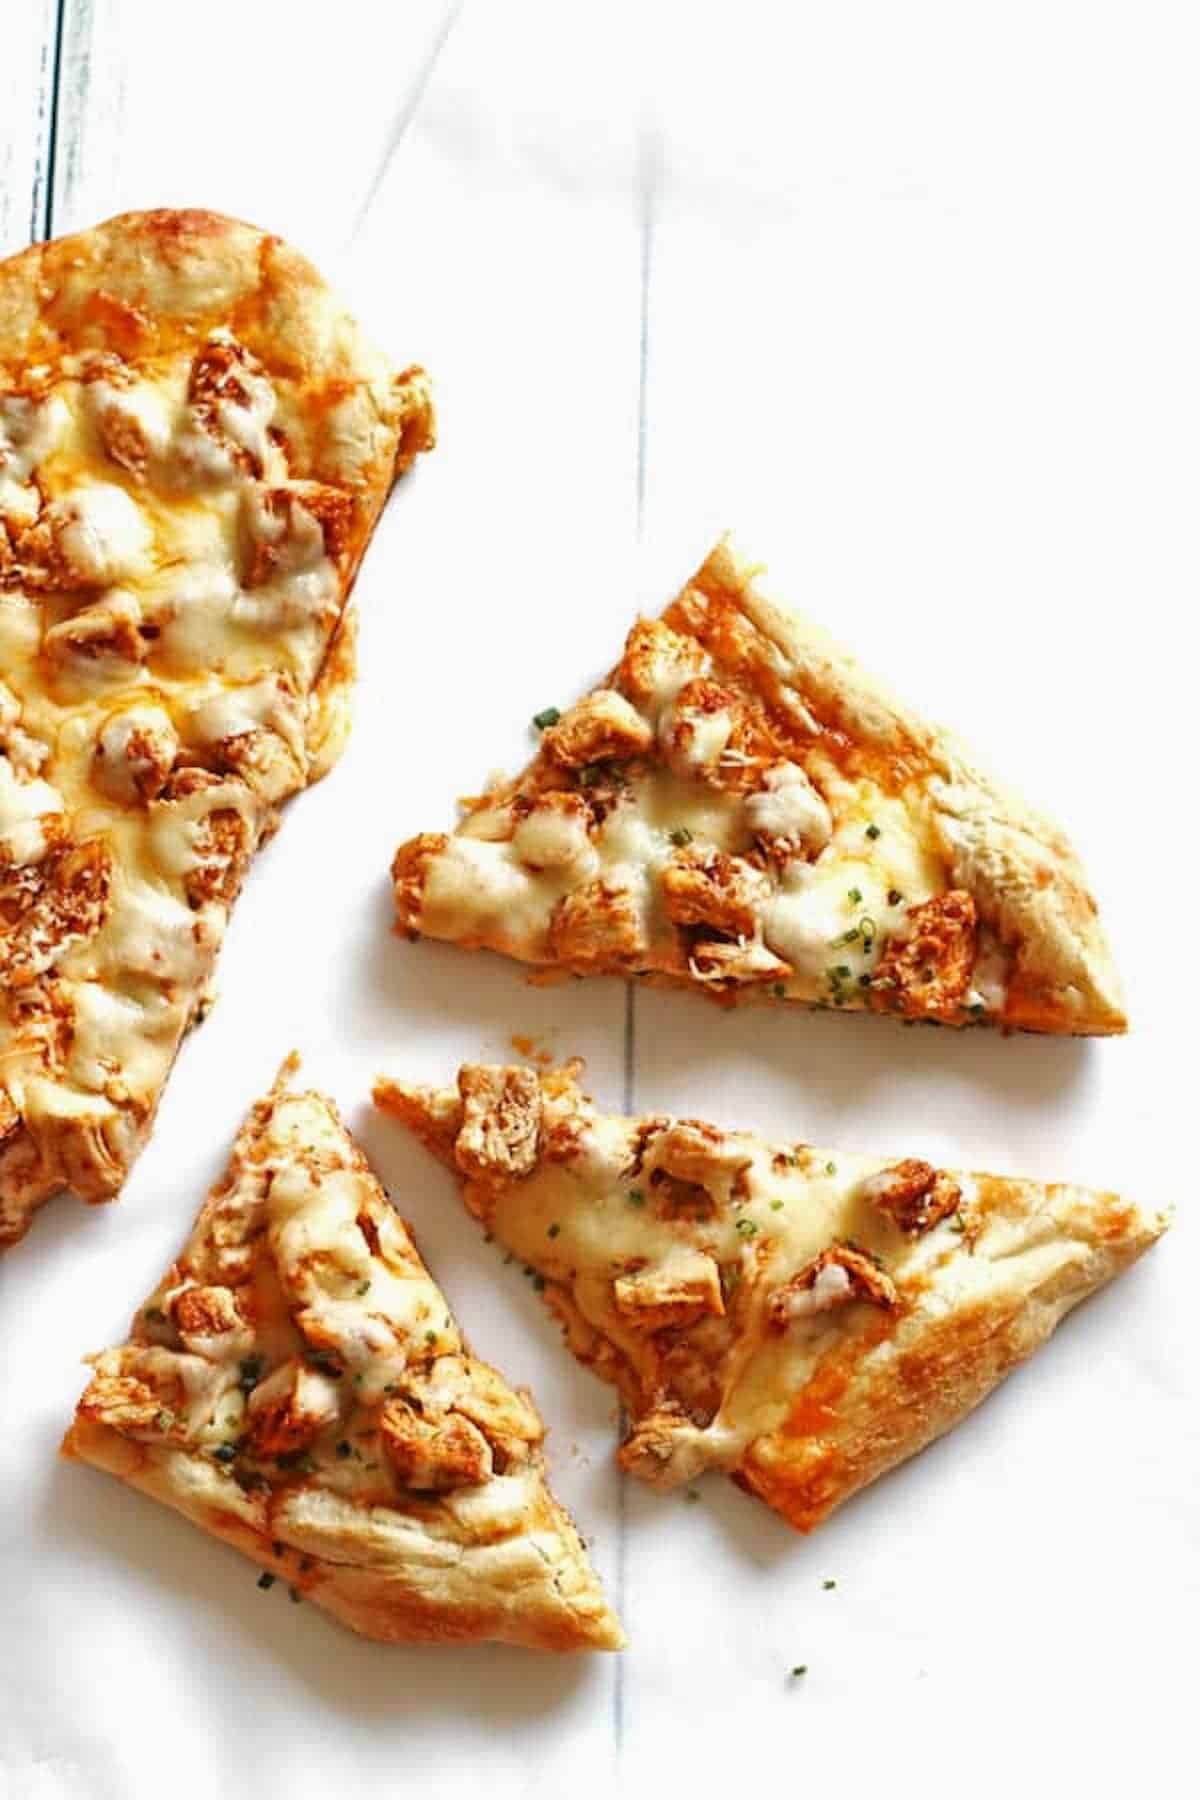 Pizza with chicken and cheese sliced on a white table